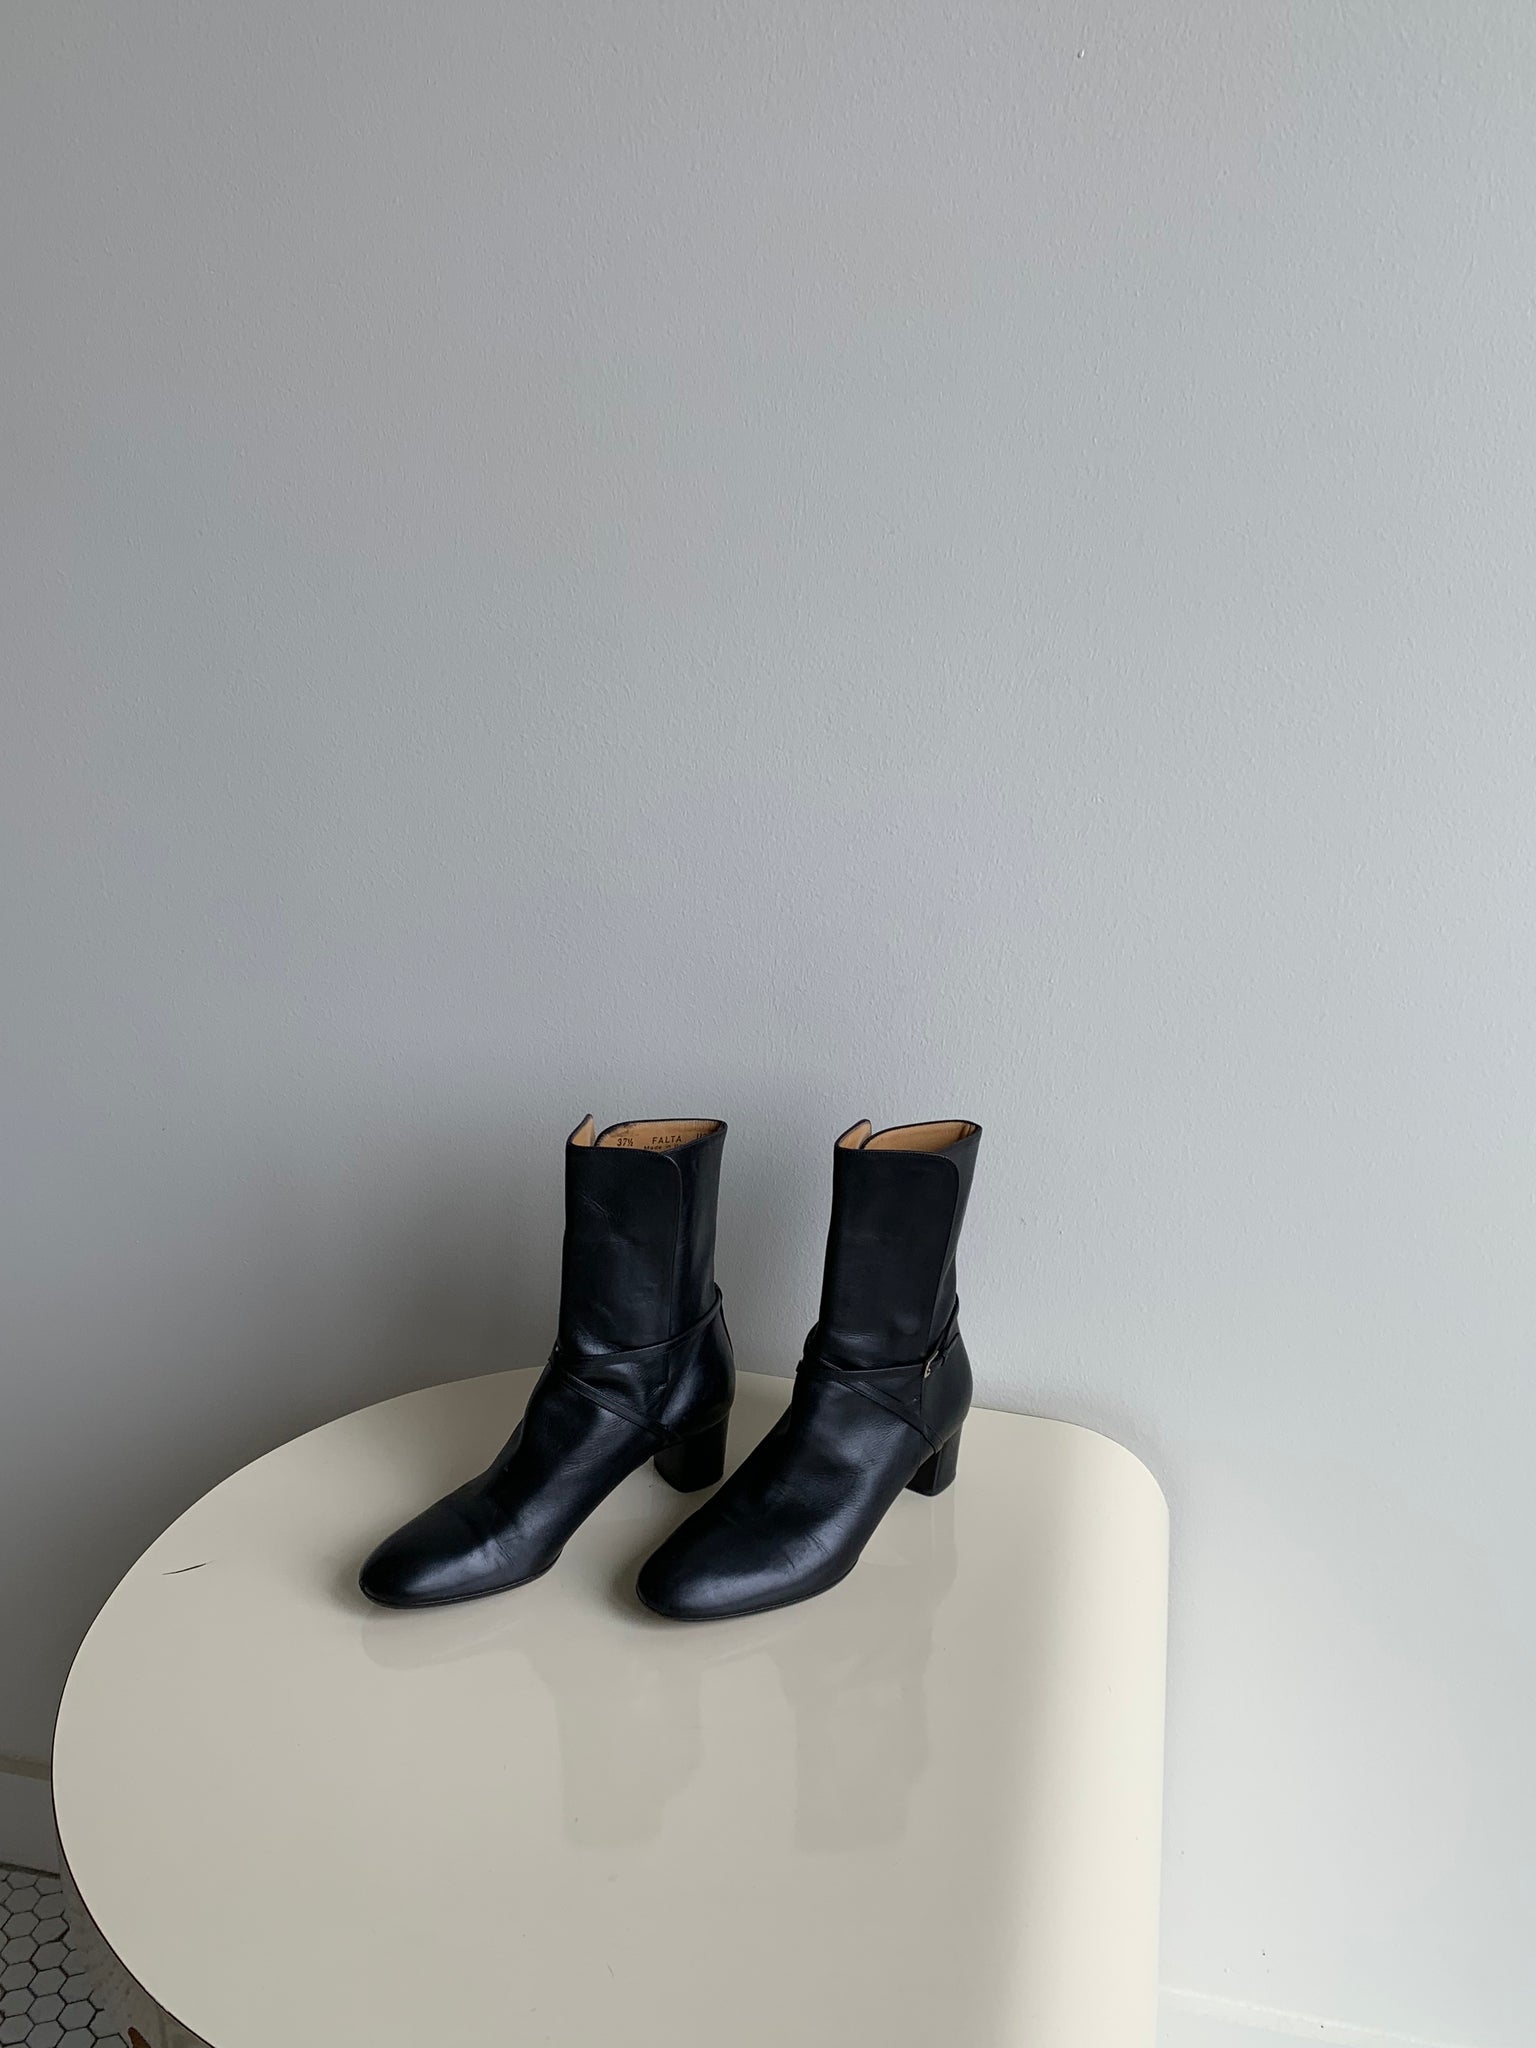 Bally ankle boots